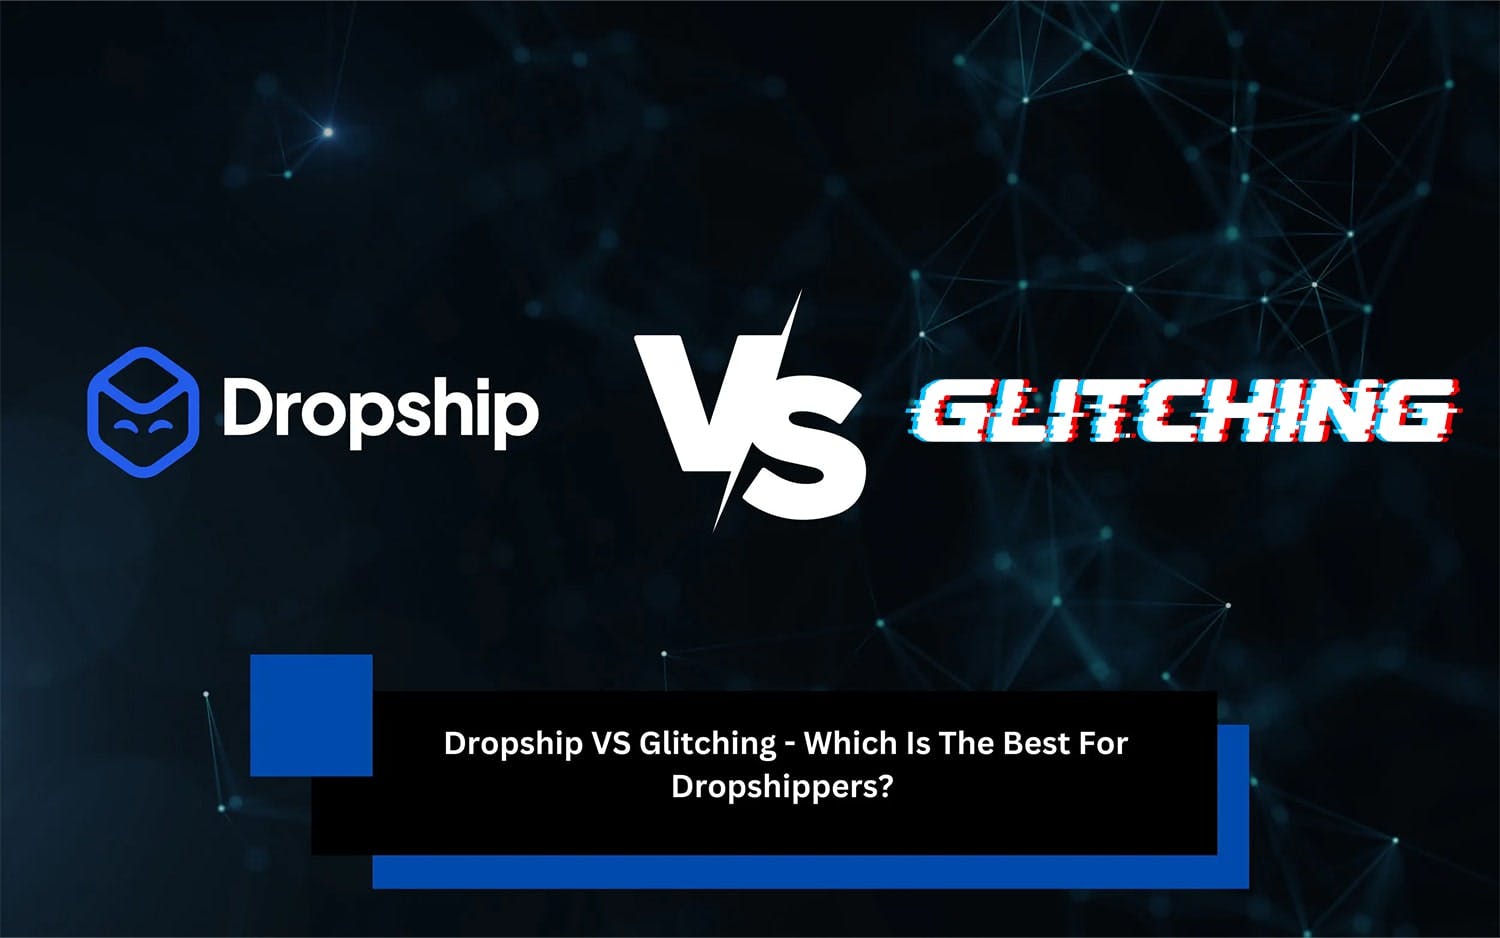 Dropship VS Glitching - Which Is Better For Dropshipping?